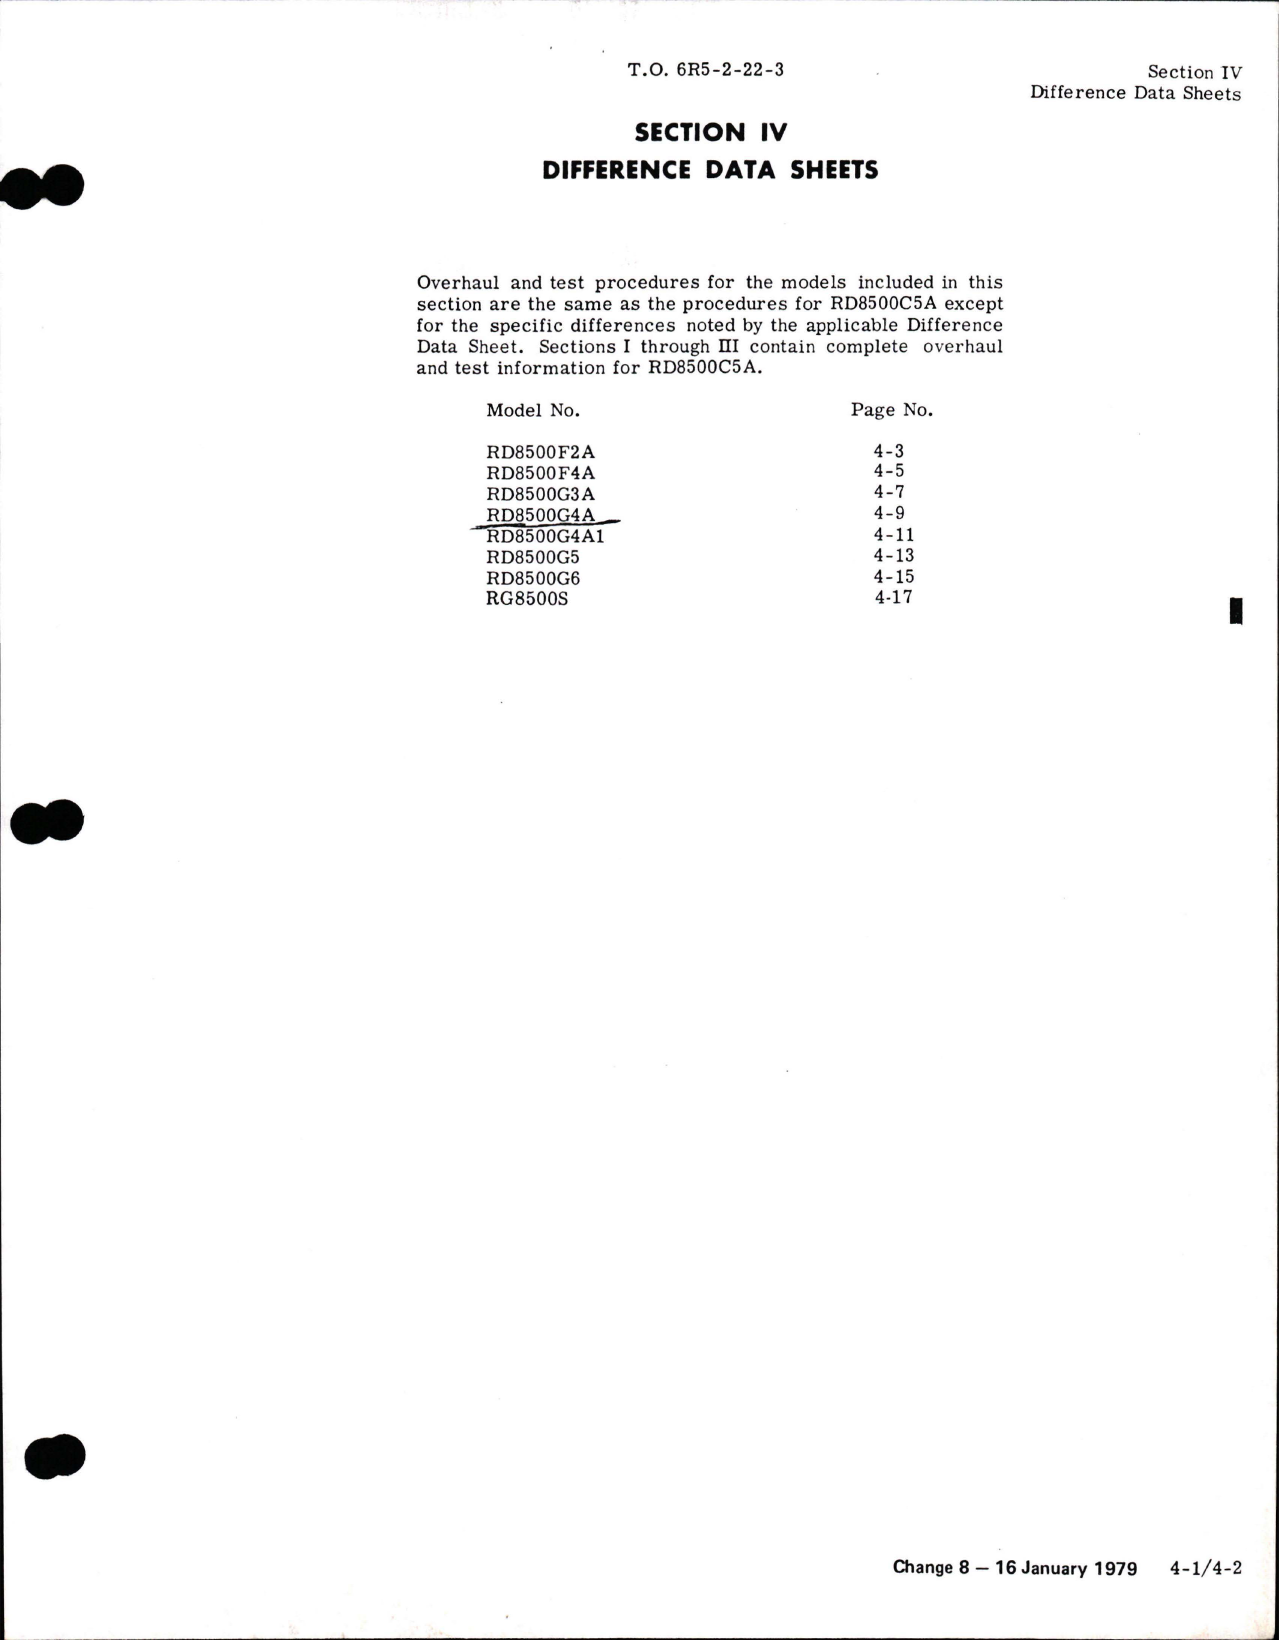 Sample page 7 from AirCorps Library document: Overhaul for Water Injection Pump - Model RD8500 Series